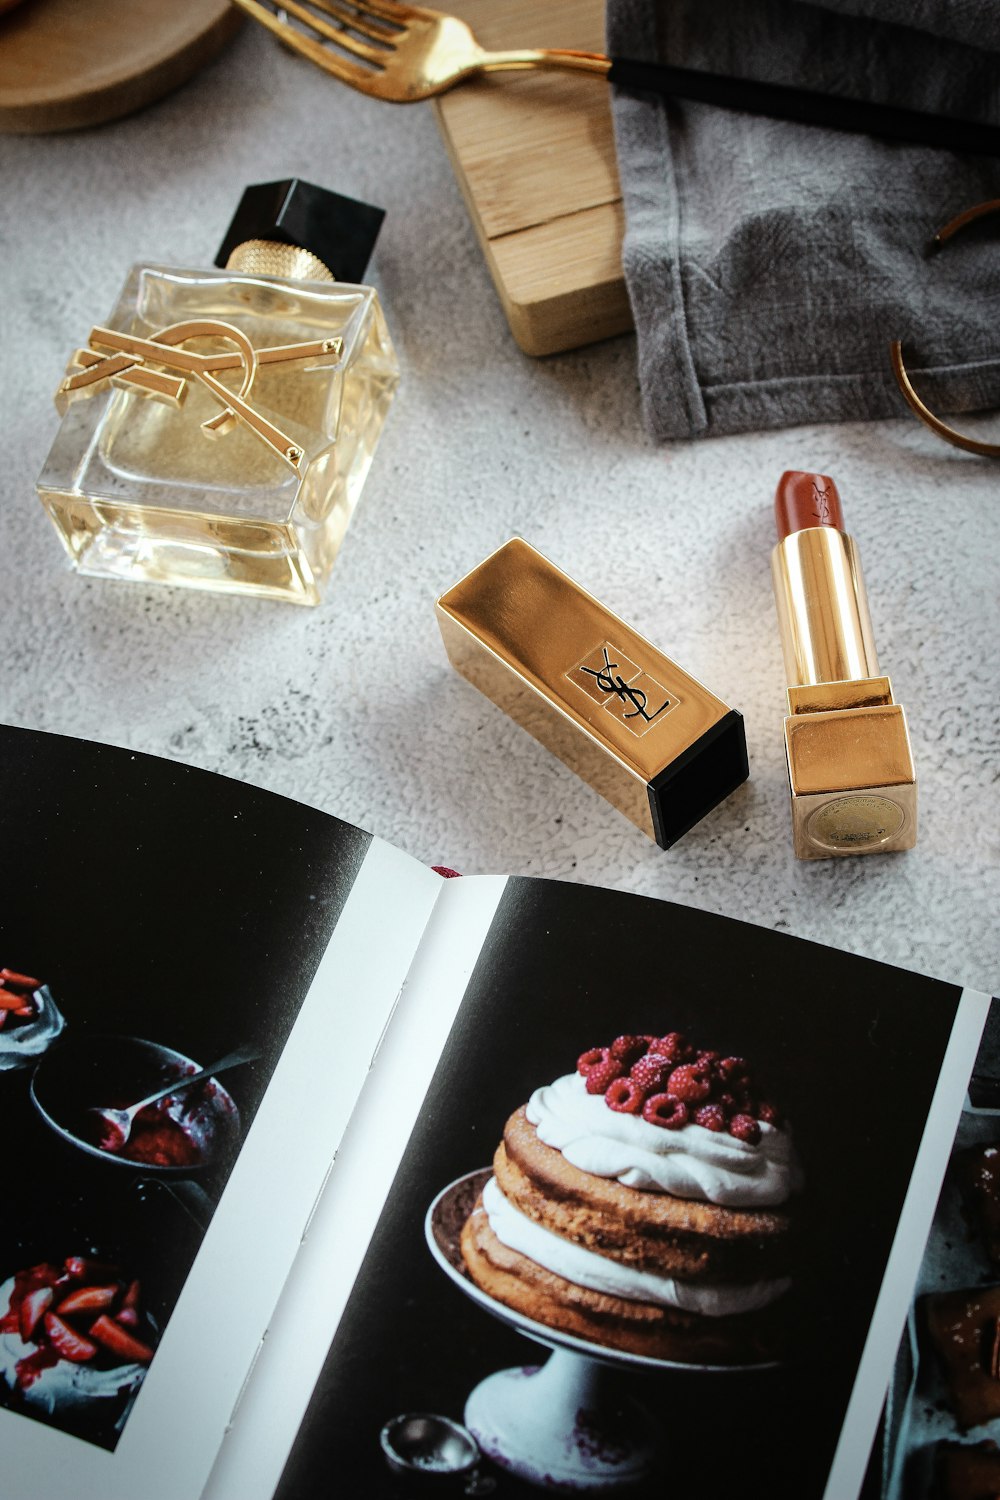 a book opened to a page with a picture of a cake and lipstick